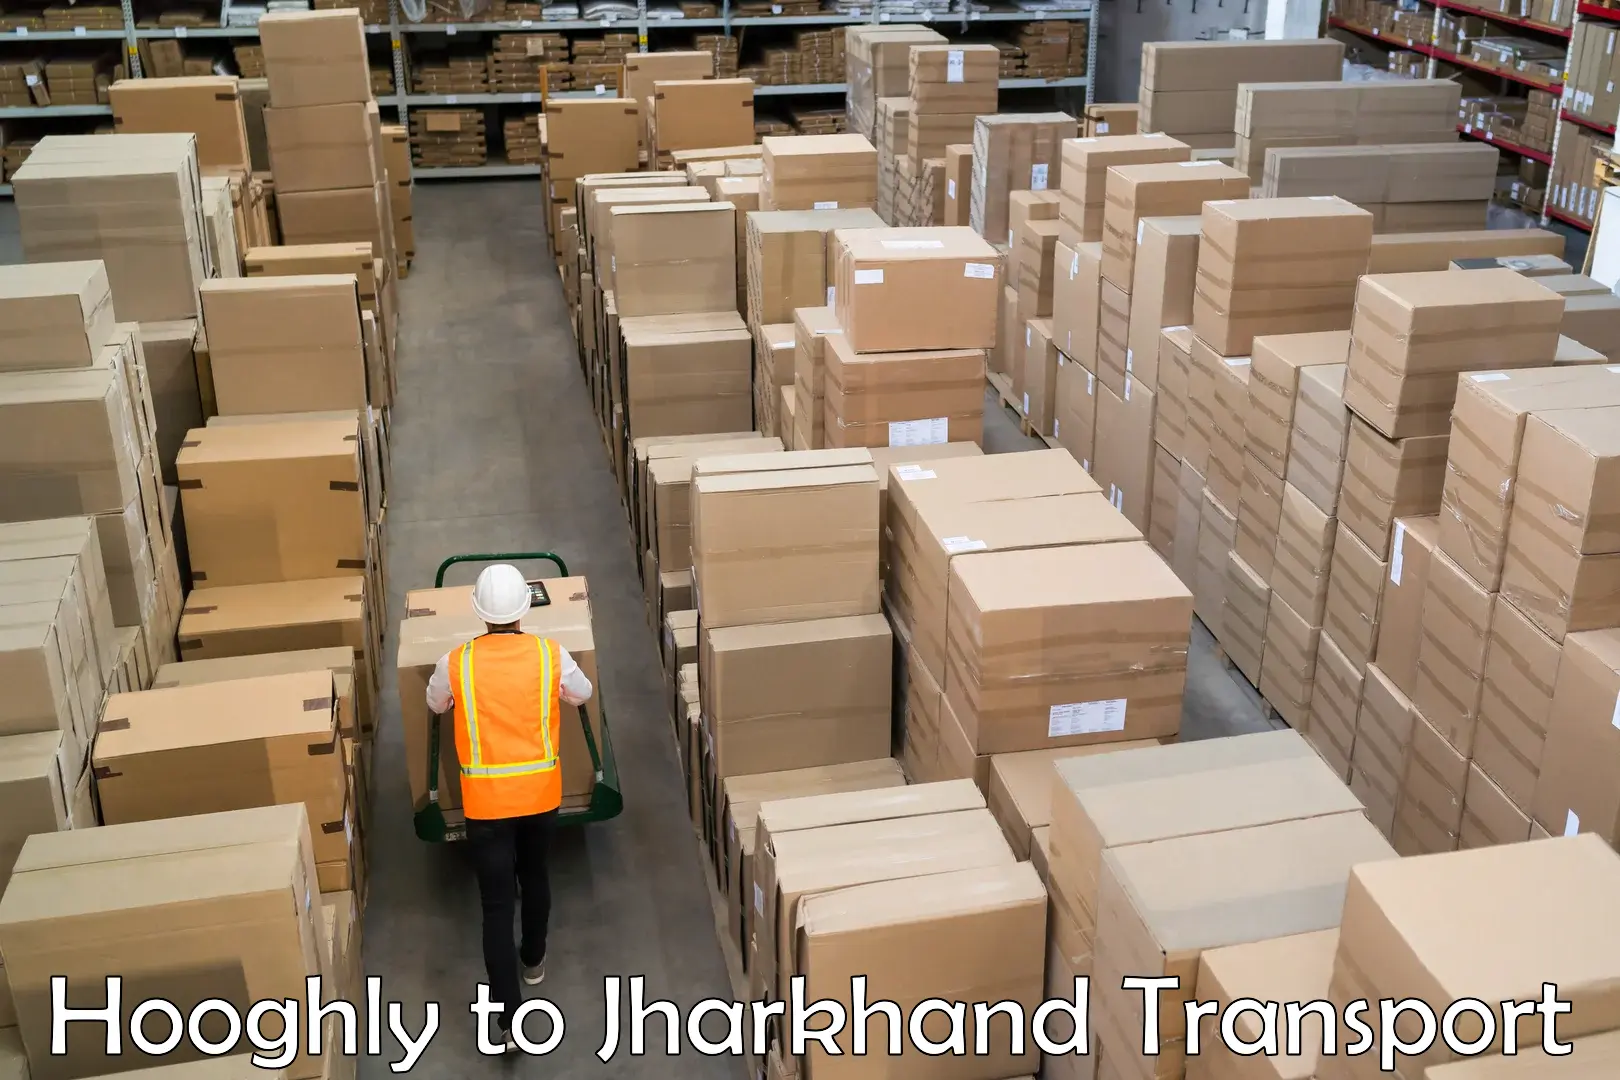 Parcel transport services Hooghly to Ghatshila